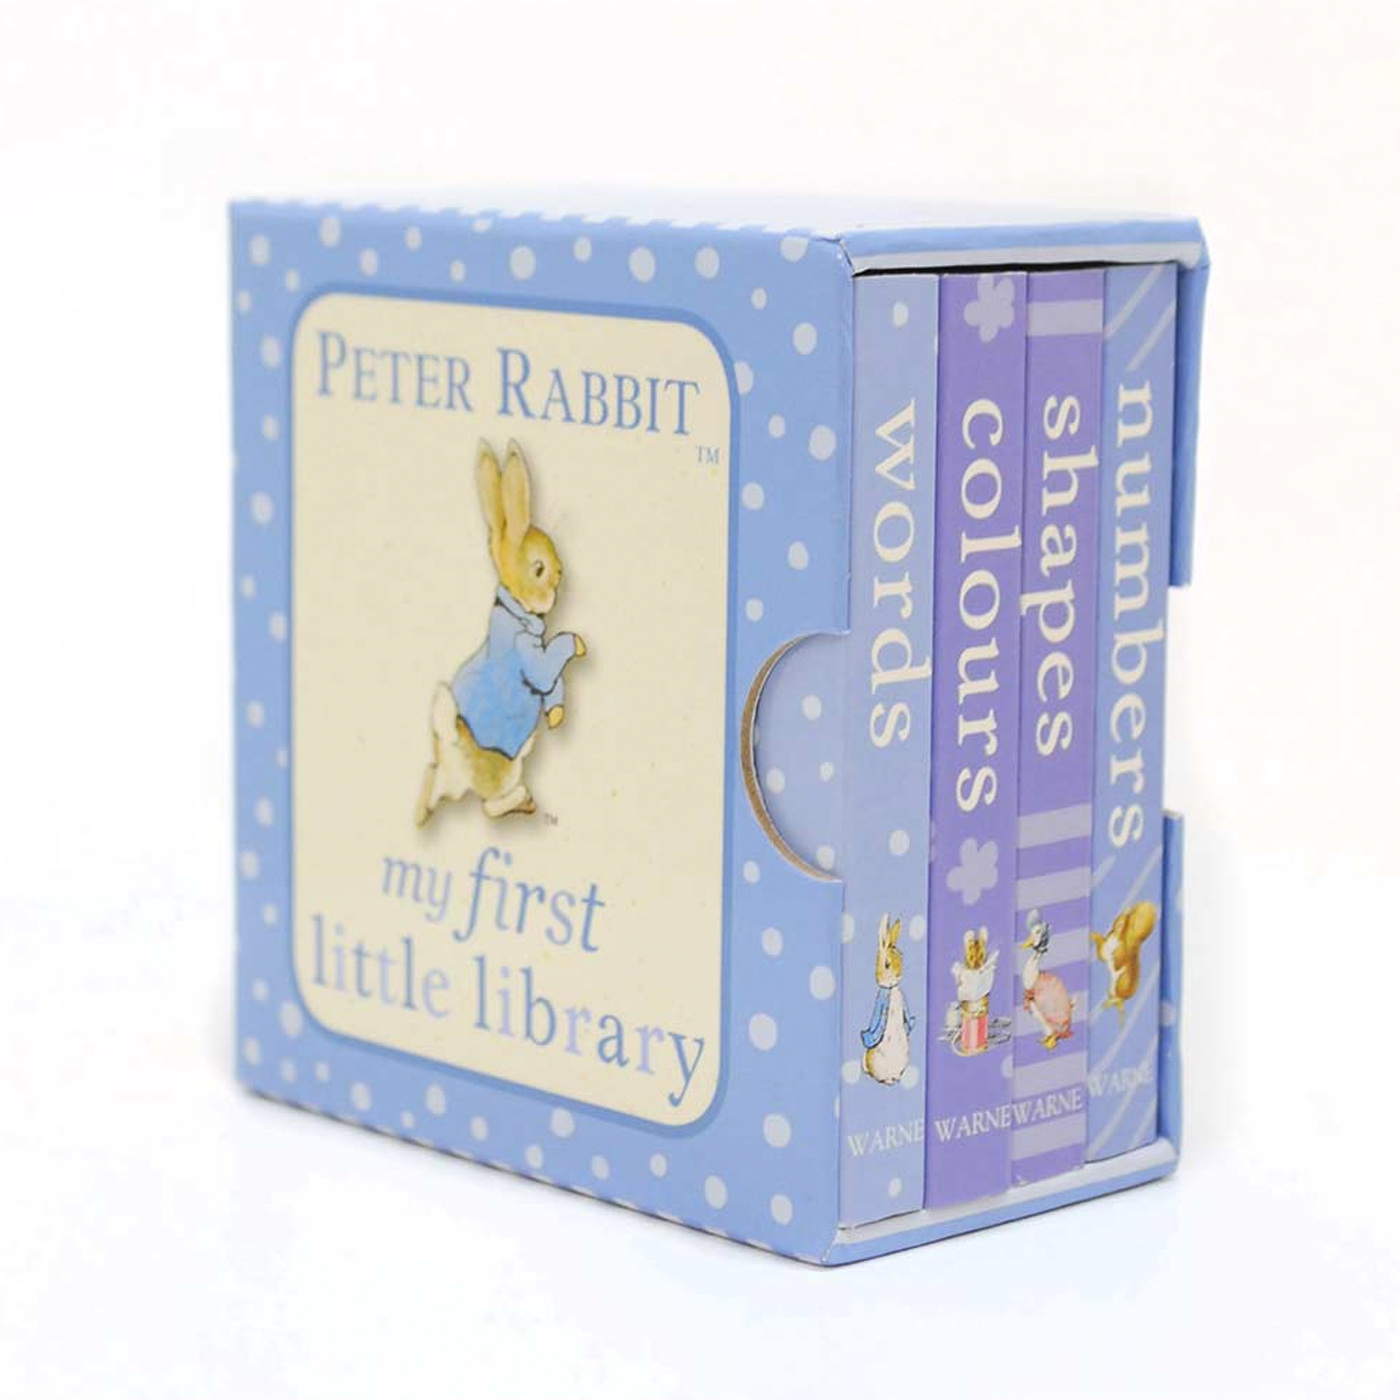  Peter Rabbit My First Little Library